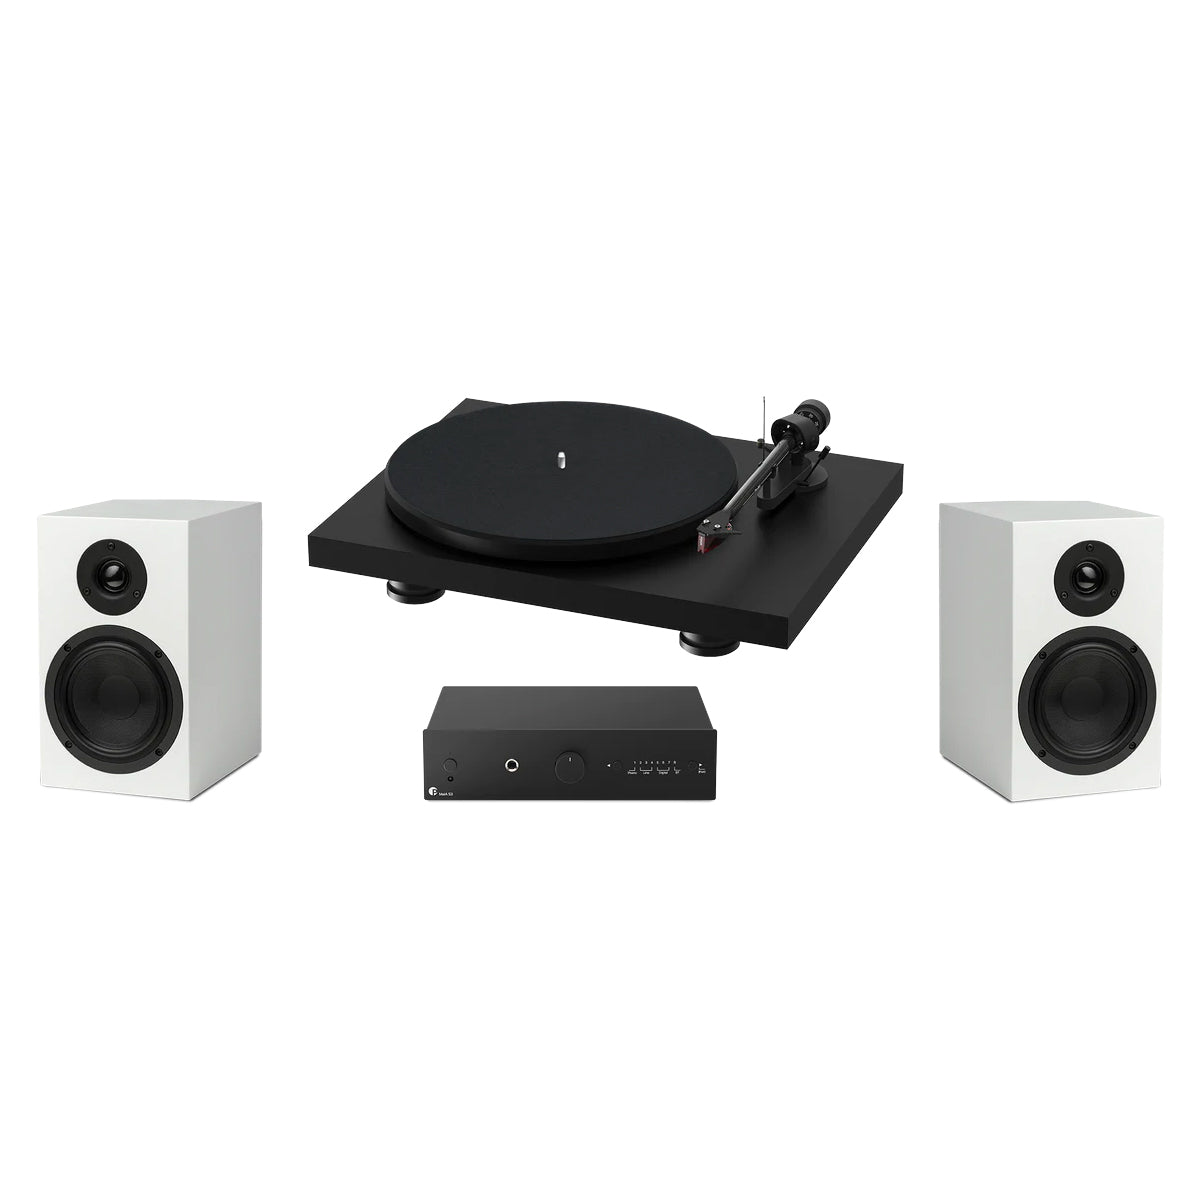 Pro-Ject Colorful Audio System - Black TT/White Speakers - The Audio Experts